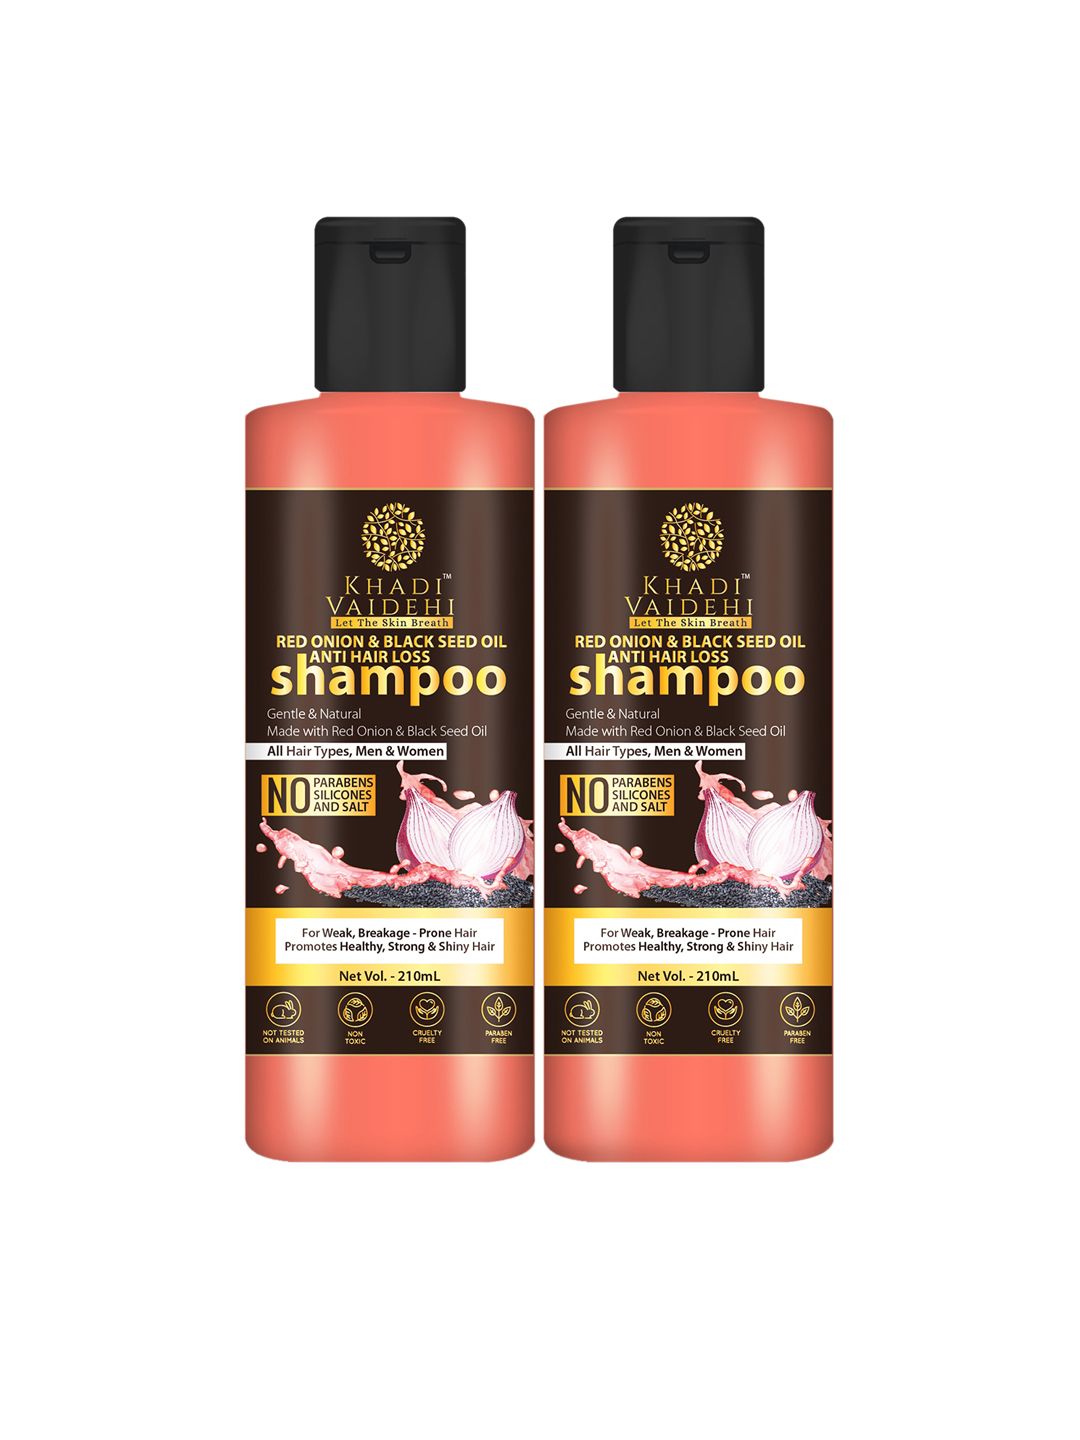 Khadi Vaidehi Set of 2 Anti Hair Loss Shampoo with Red Onion & Black Seed Oil - 210ml Each Price in India